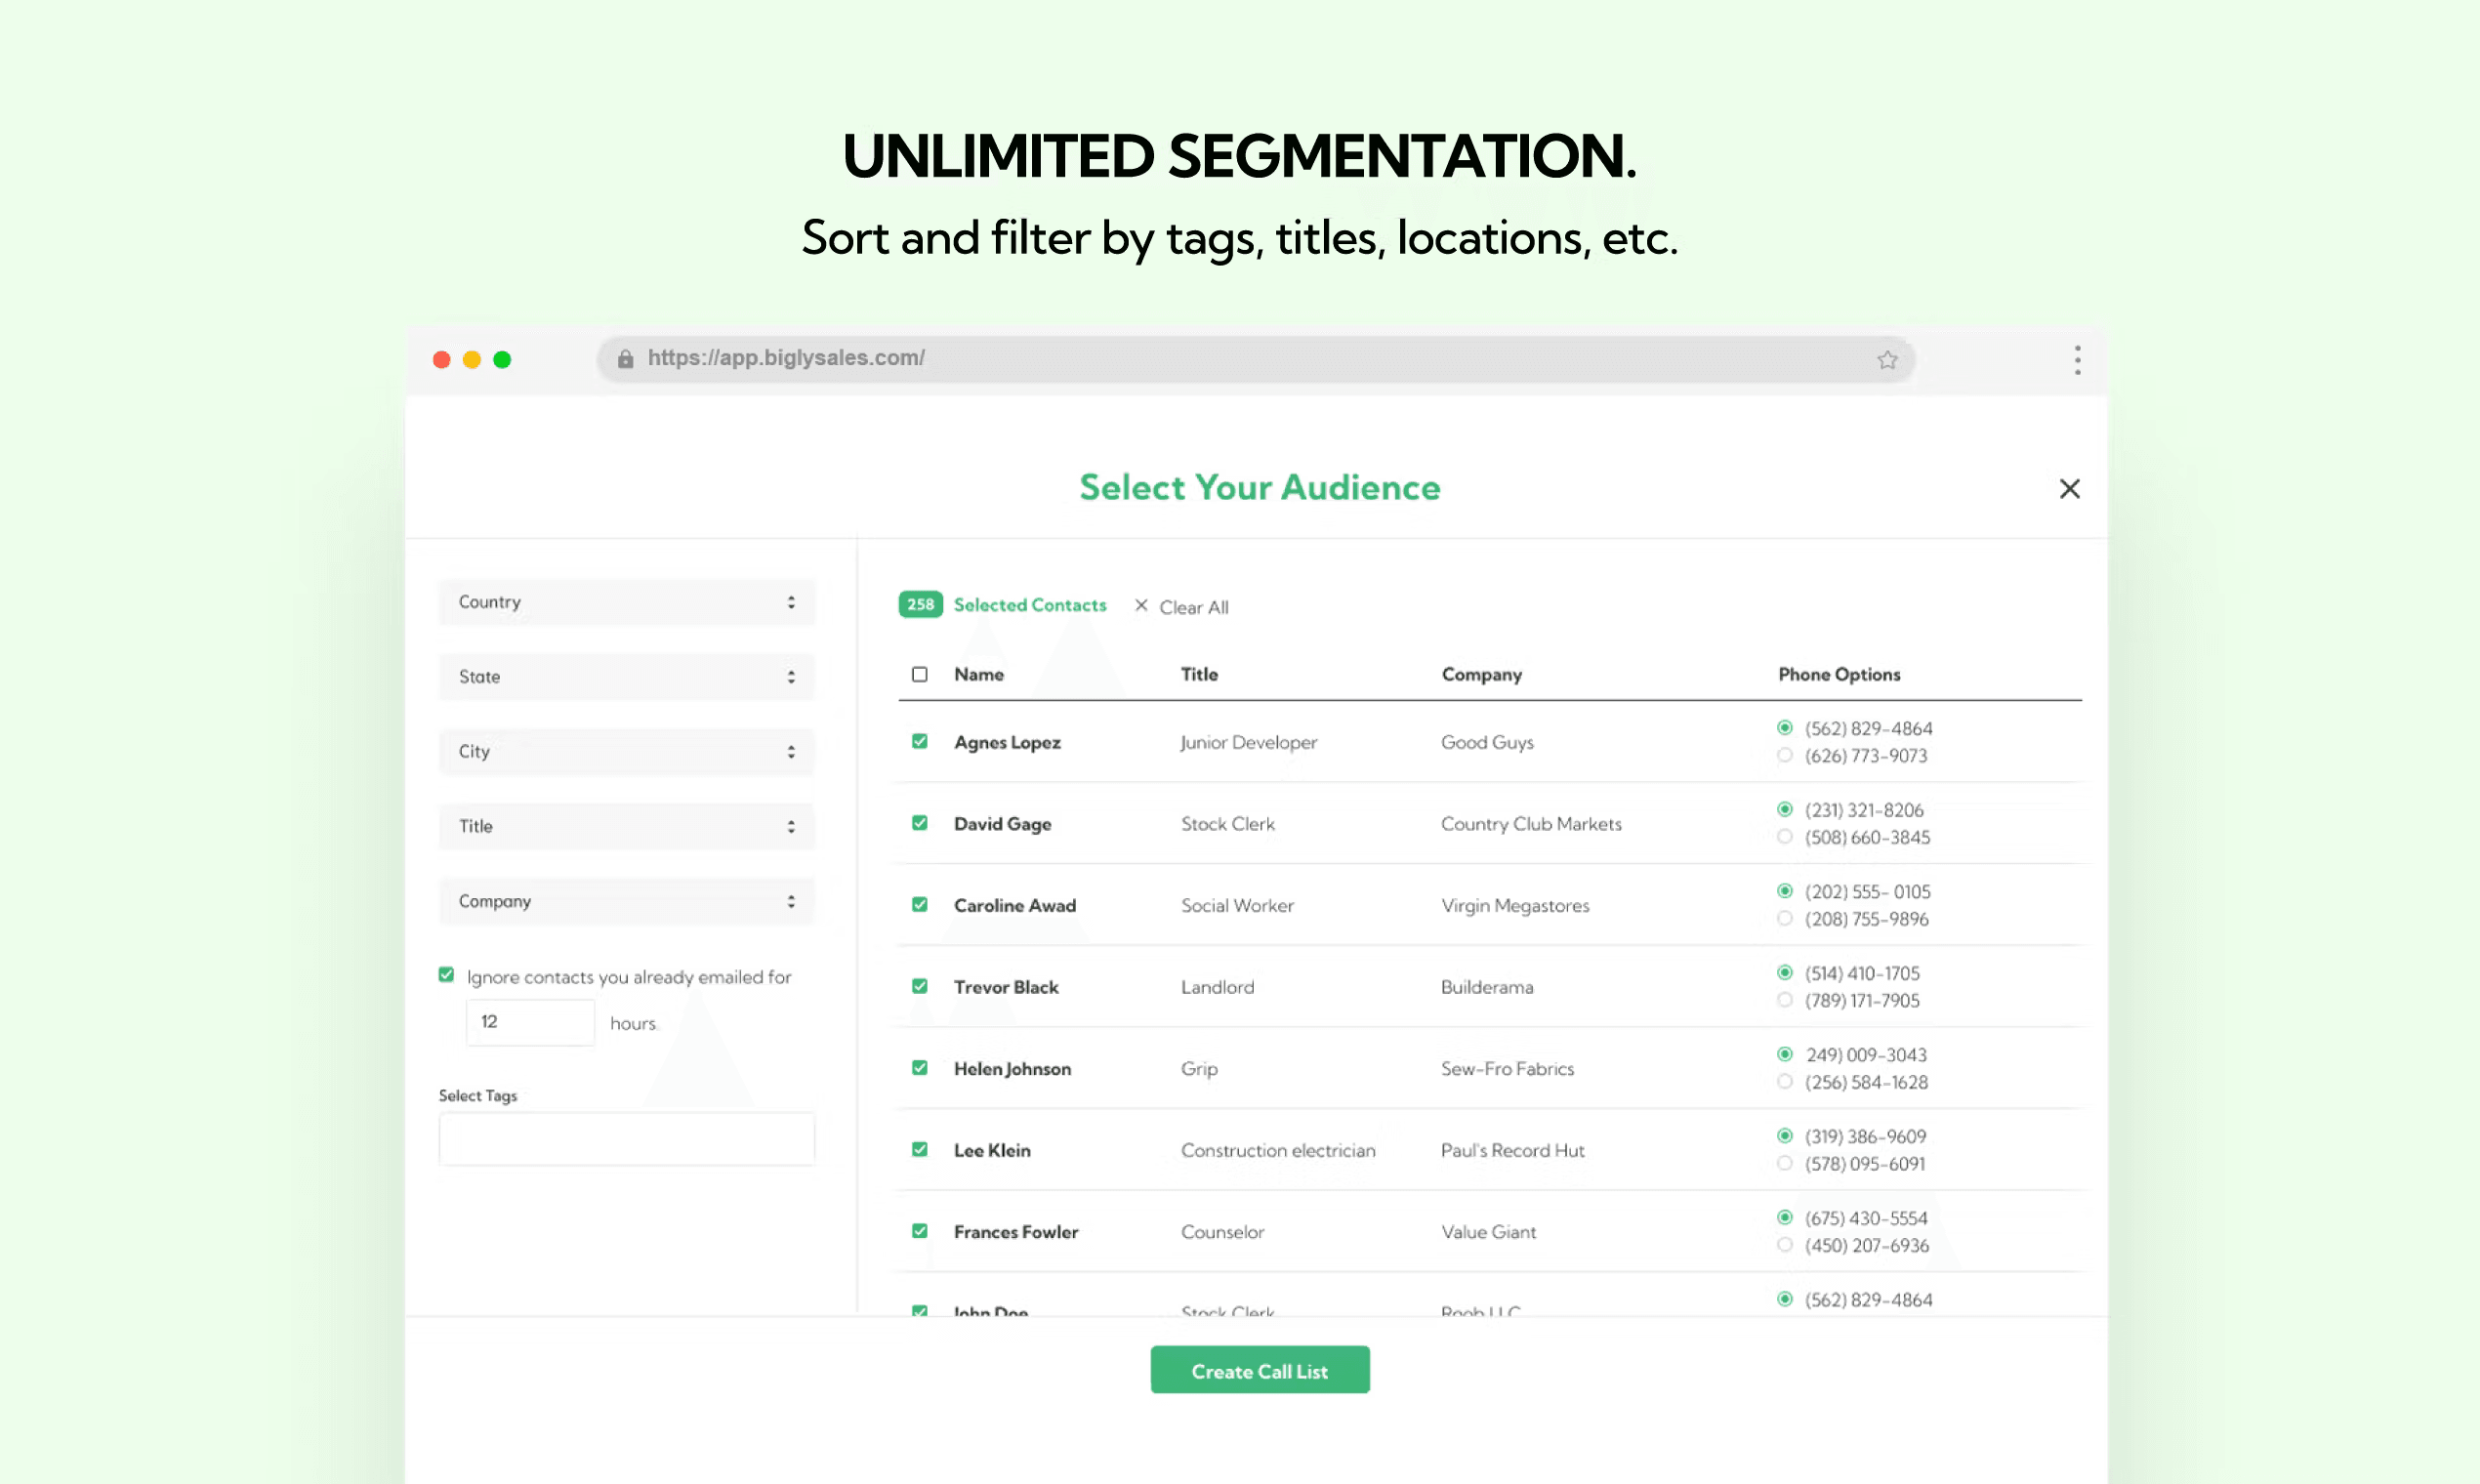 Unlimited segmentation. Sort and filter by tags, titles, locations, etc.